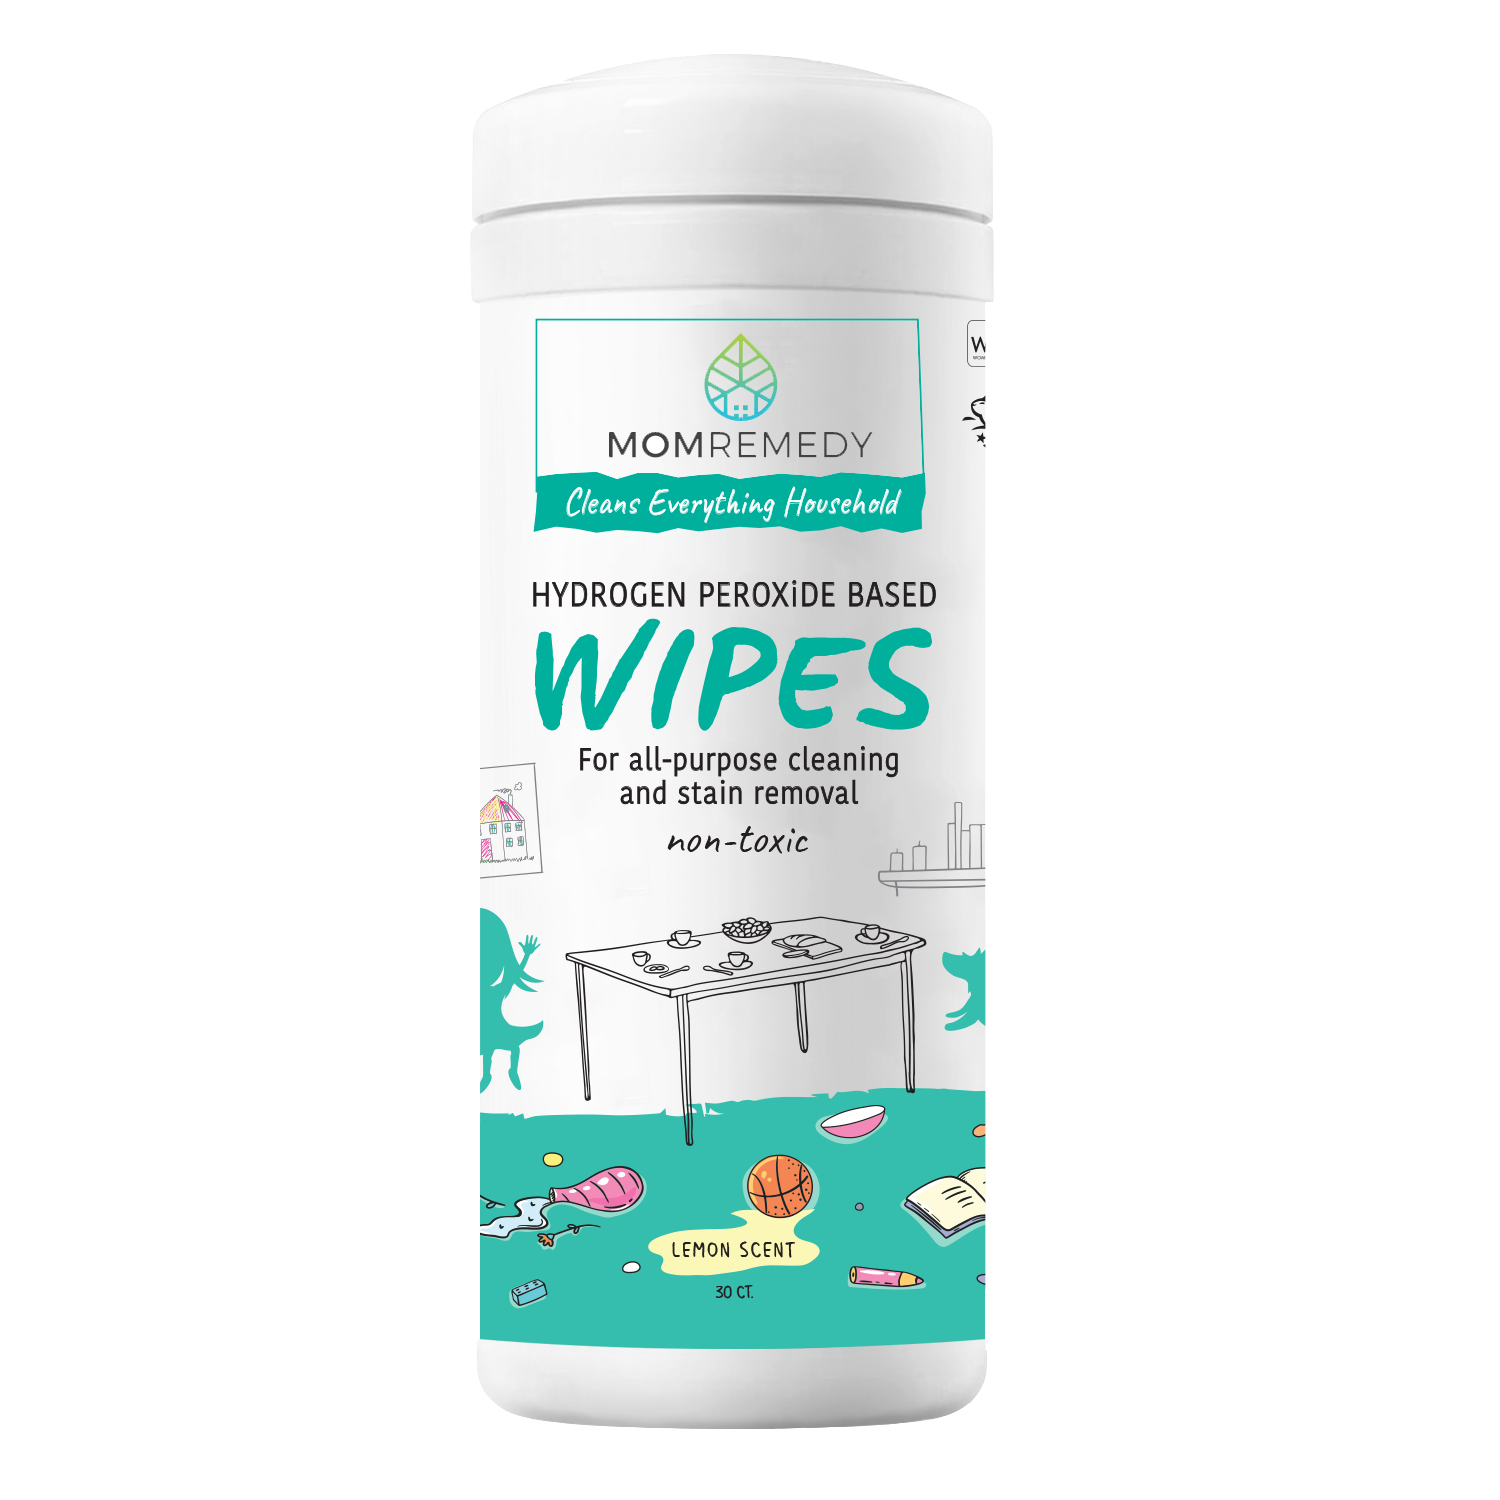 Hydrogen Peroxide Wipes for All Purpose Cleaning and Stain Removal - 3 Pack of 30 ct